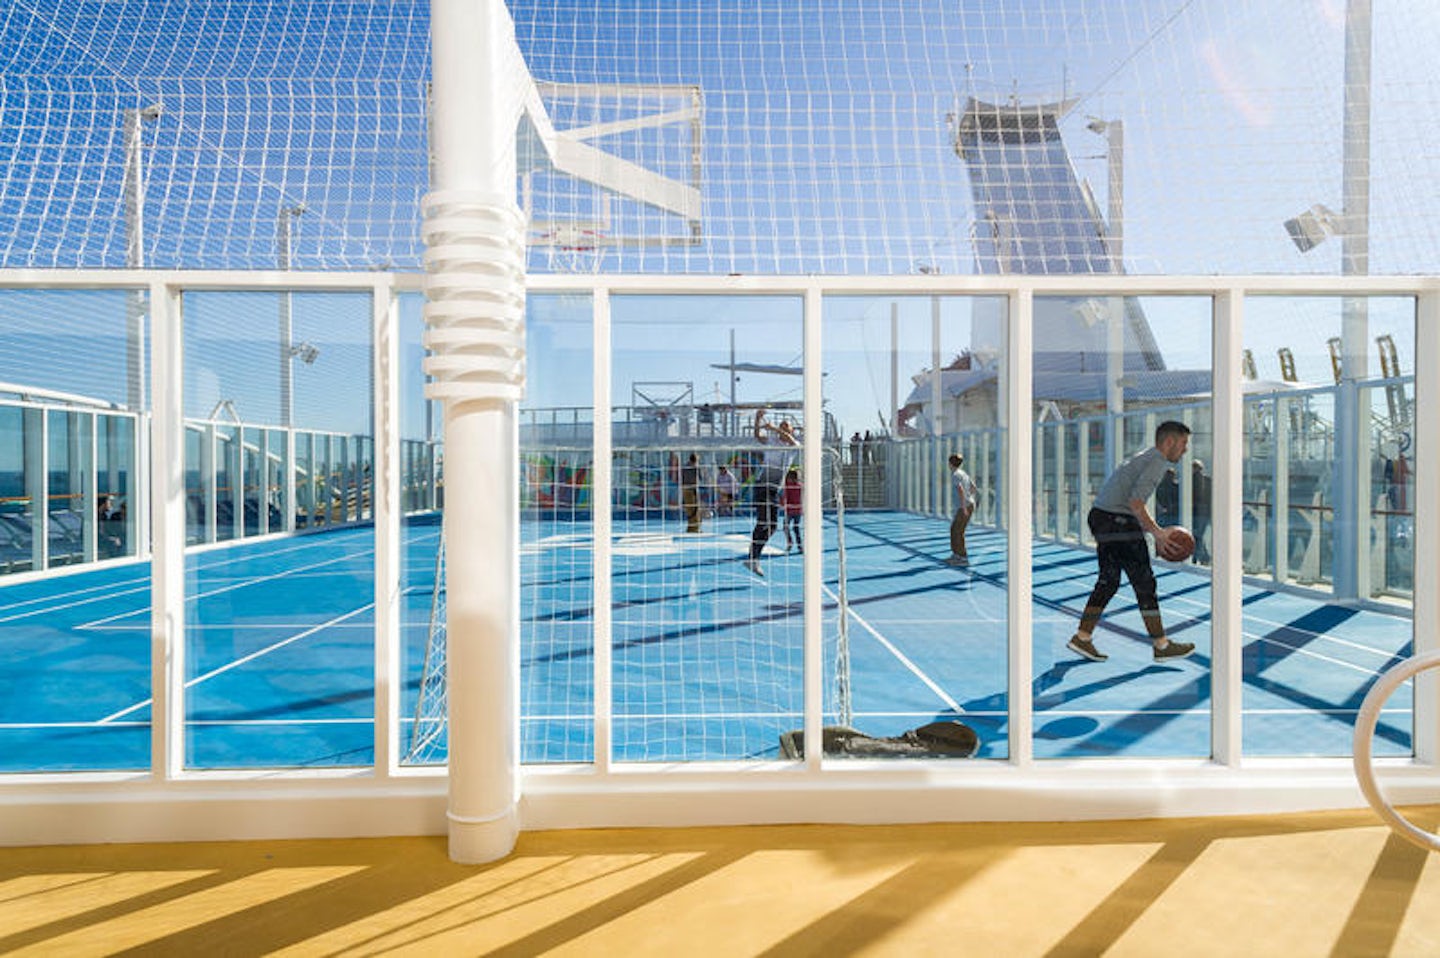 Sports Court on Symphony of the Seas